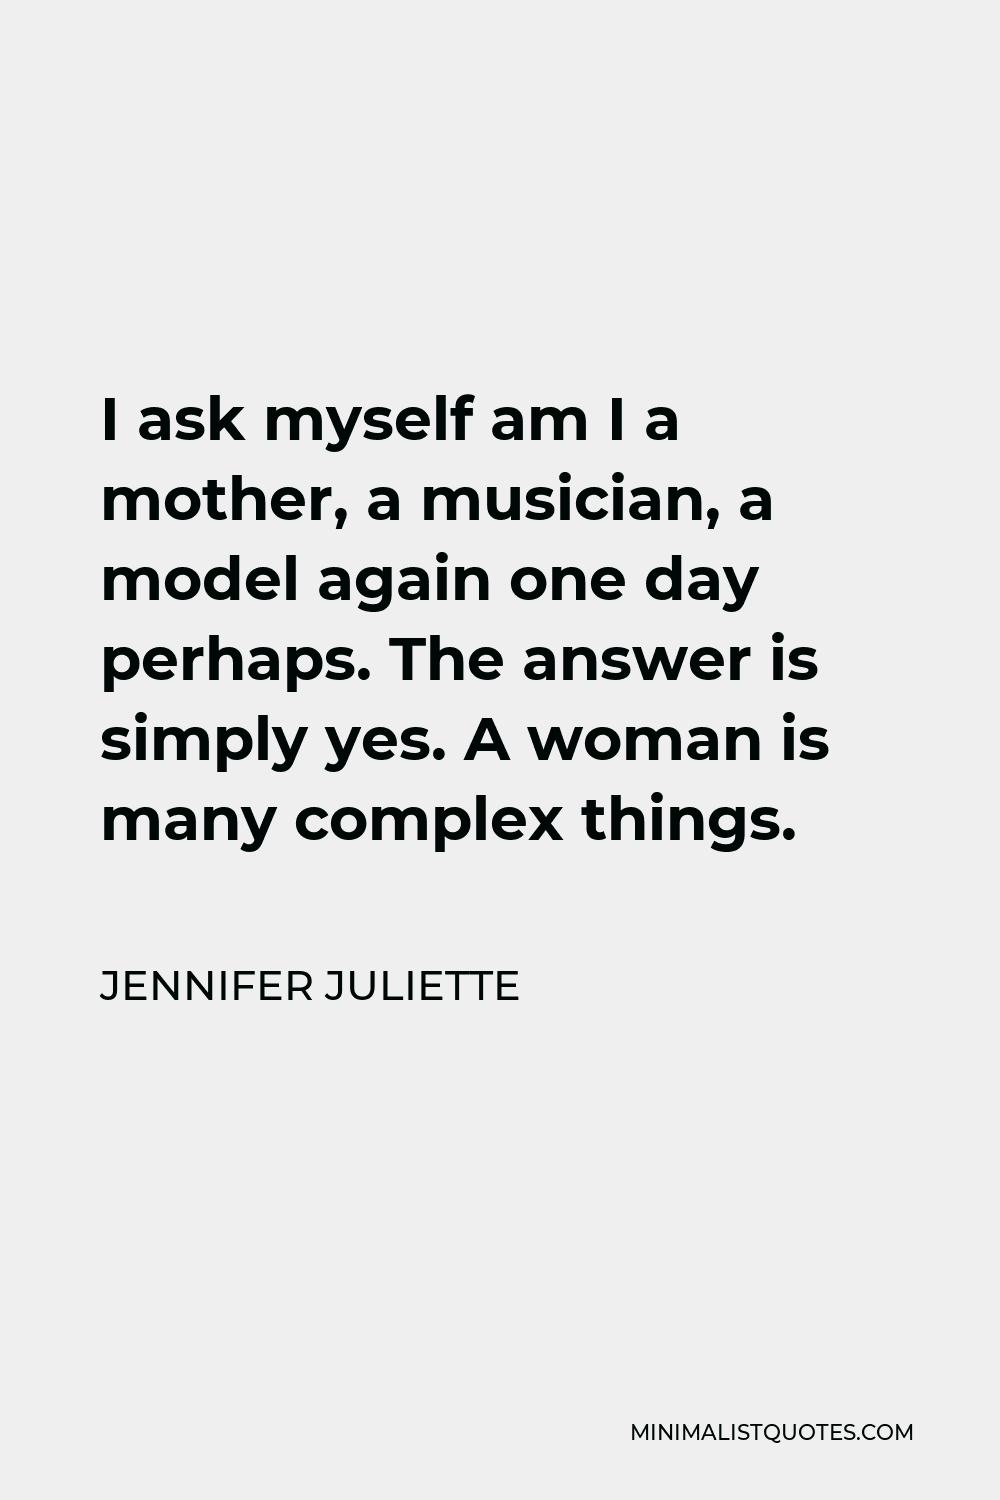 Jennifer Juliette Quote - I ask myself am I a mother, a musician, a model again one day perhaps. The answer is simply yes. A woman is many complex things.